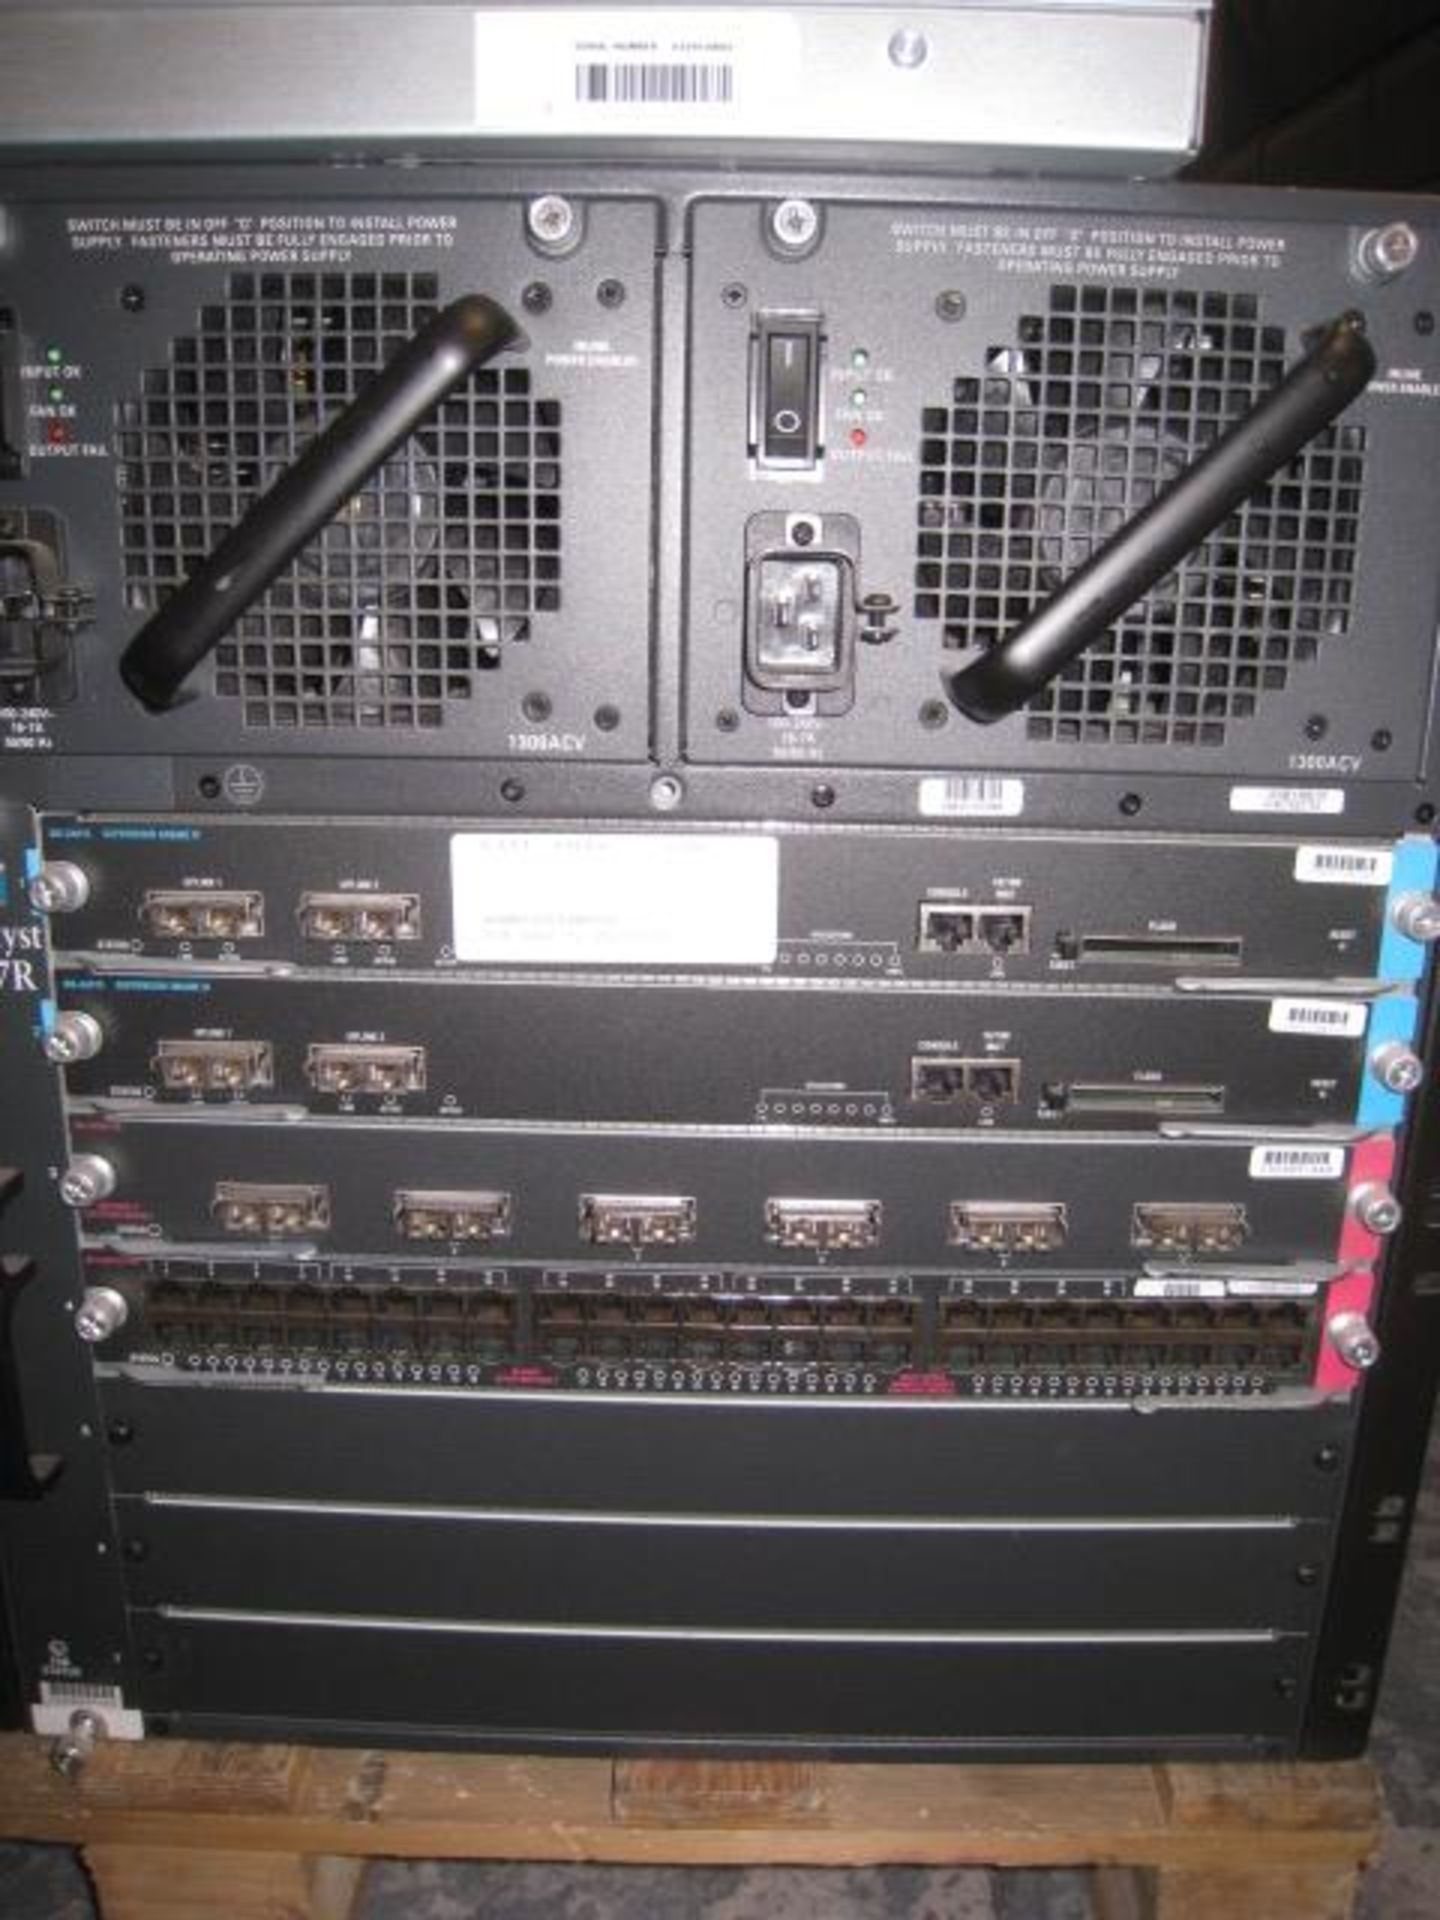 CISCO CATALYST 4507R CHASSIS, CONTAINING 2 X WS-X4515 SUPERVISOR ENGINE, 1 X X4306 1000 BASE X